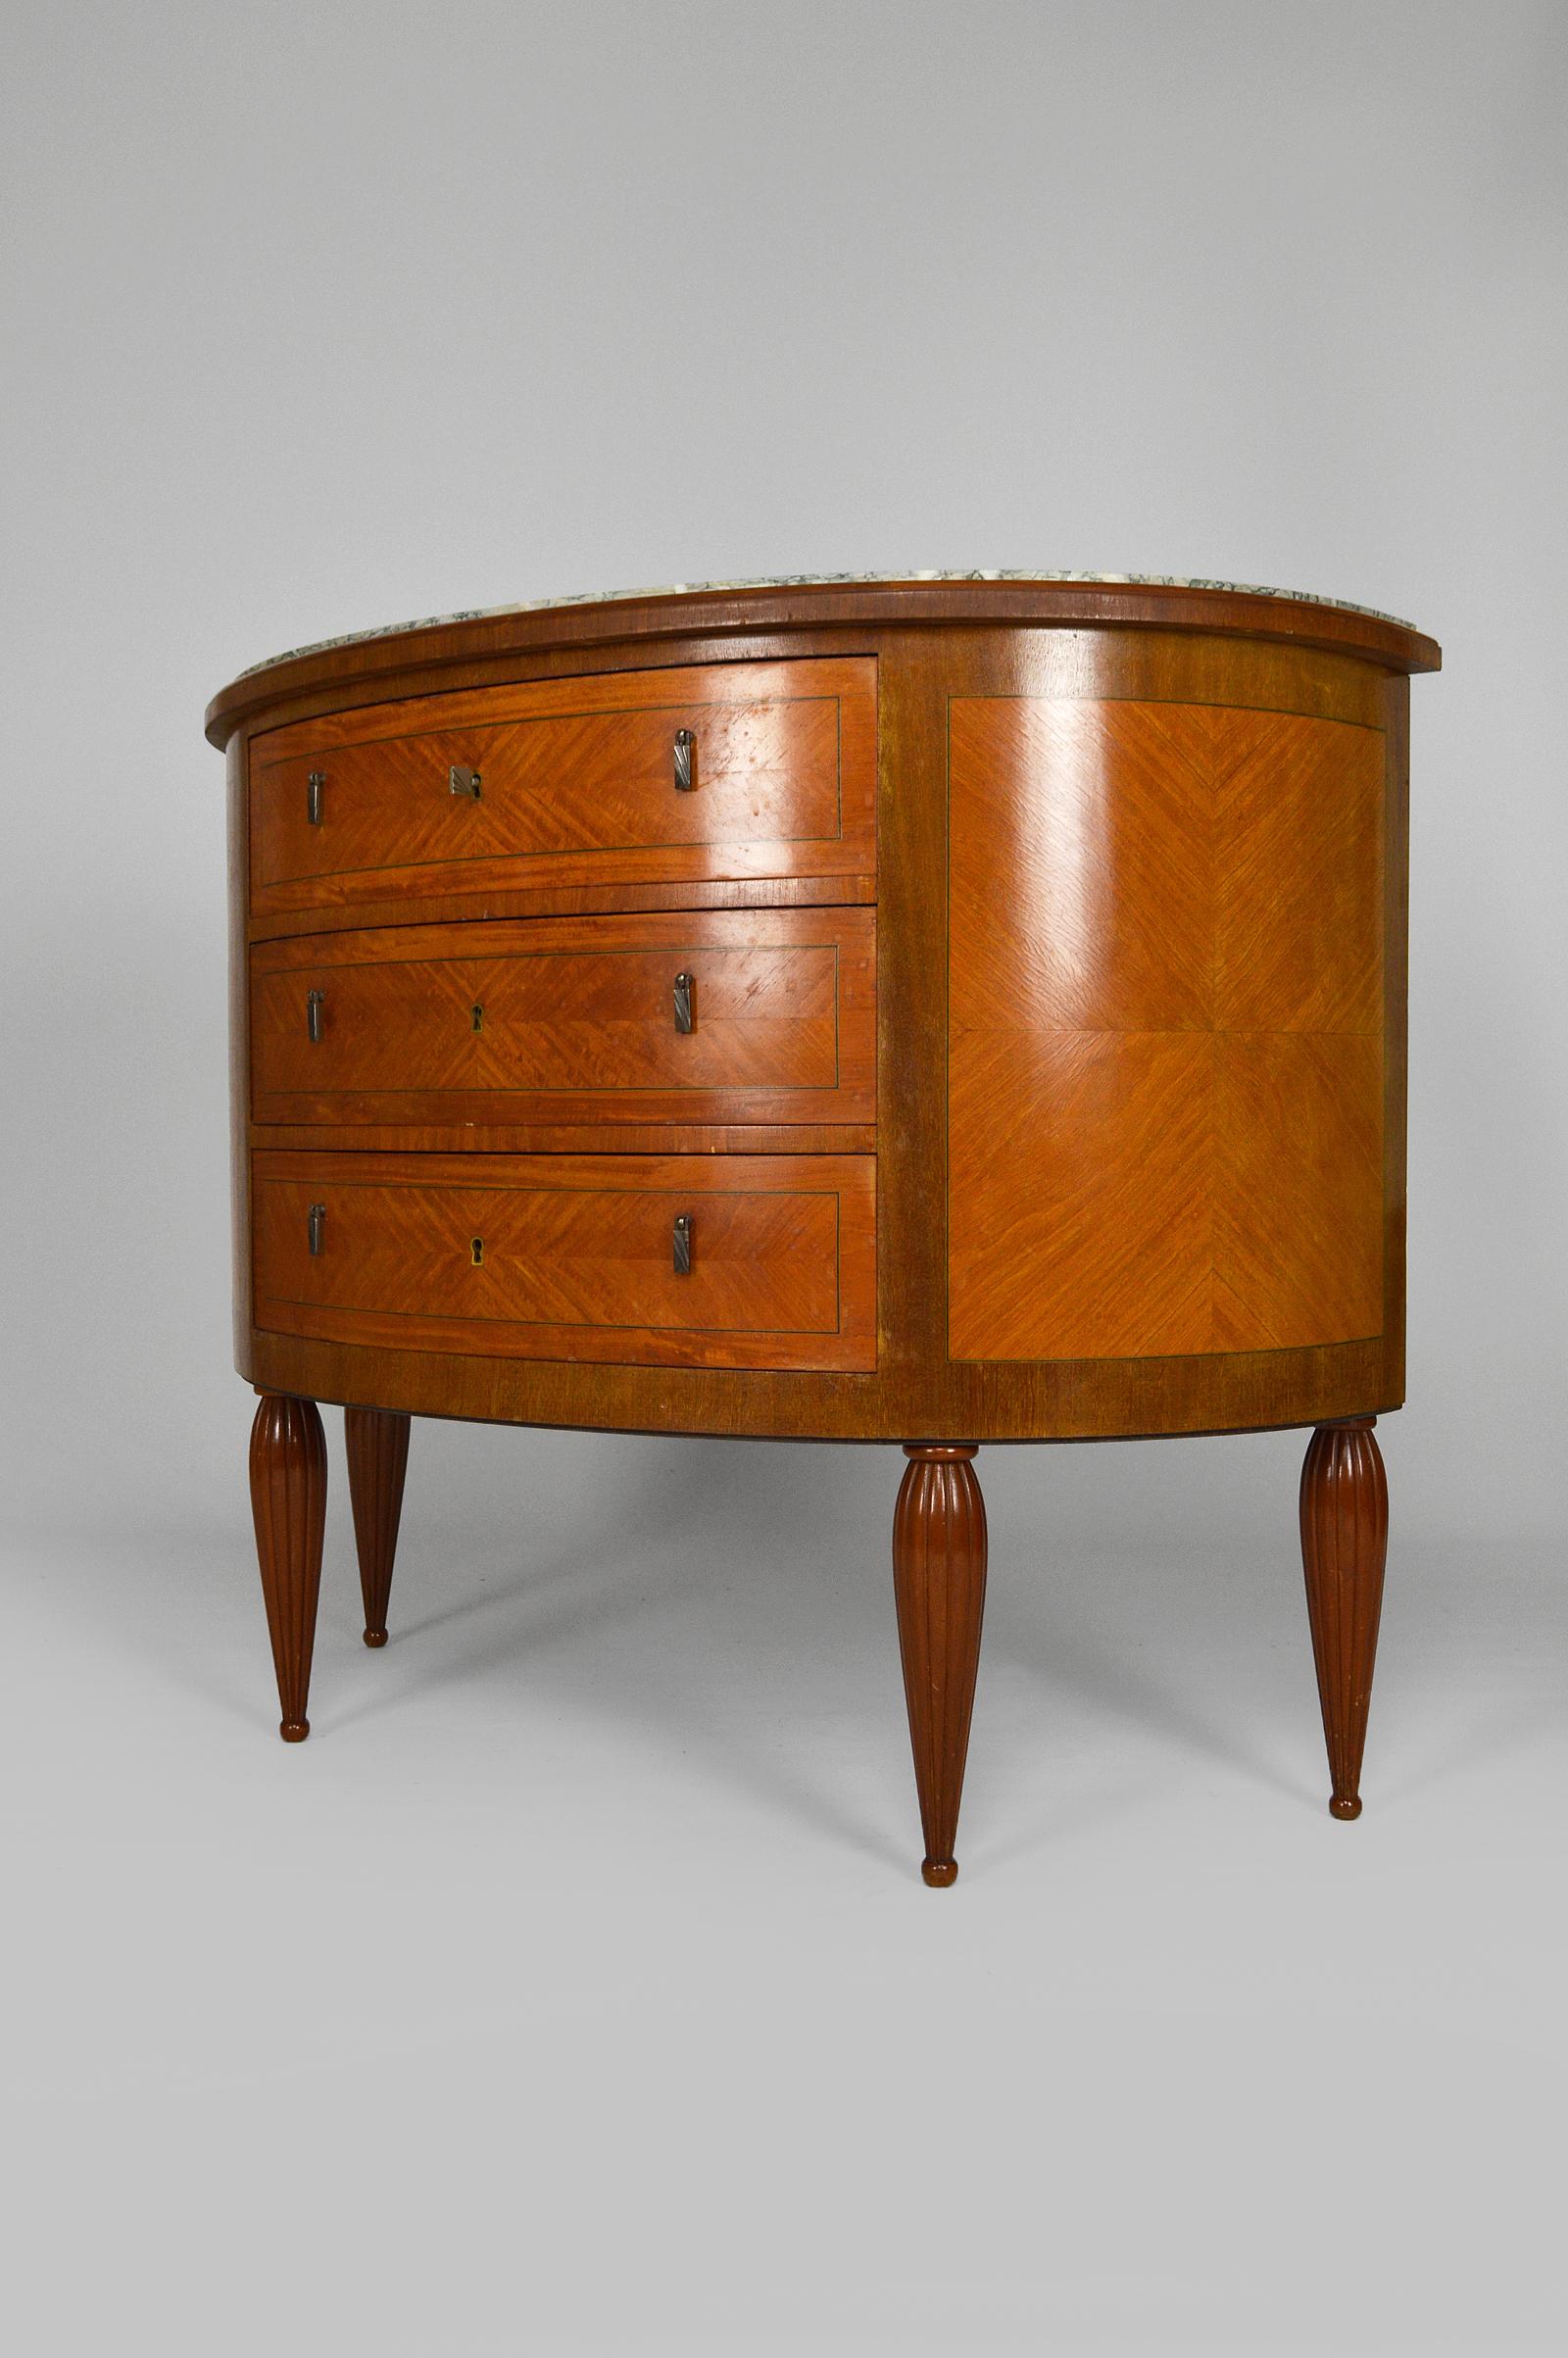 Early 20th Century Art Deco Demilune Mahogany & Marble-Top Commode / Chest of Drawers, circa 1925 For Sale